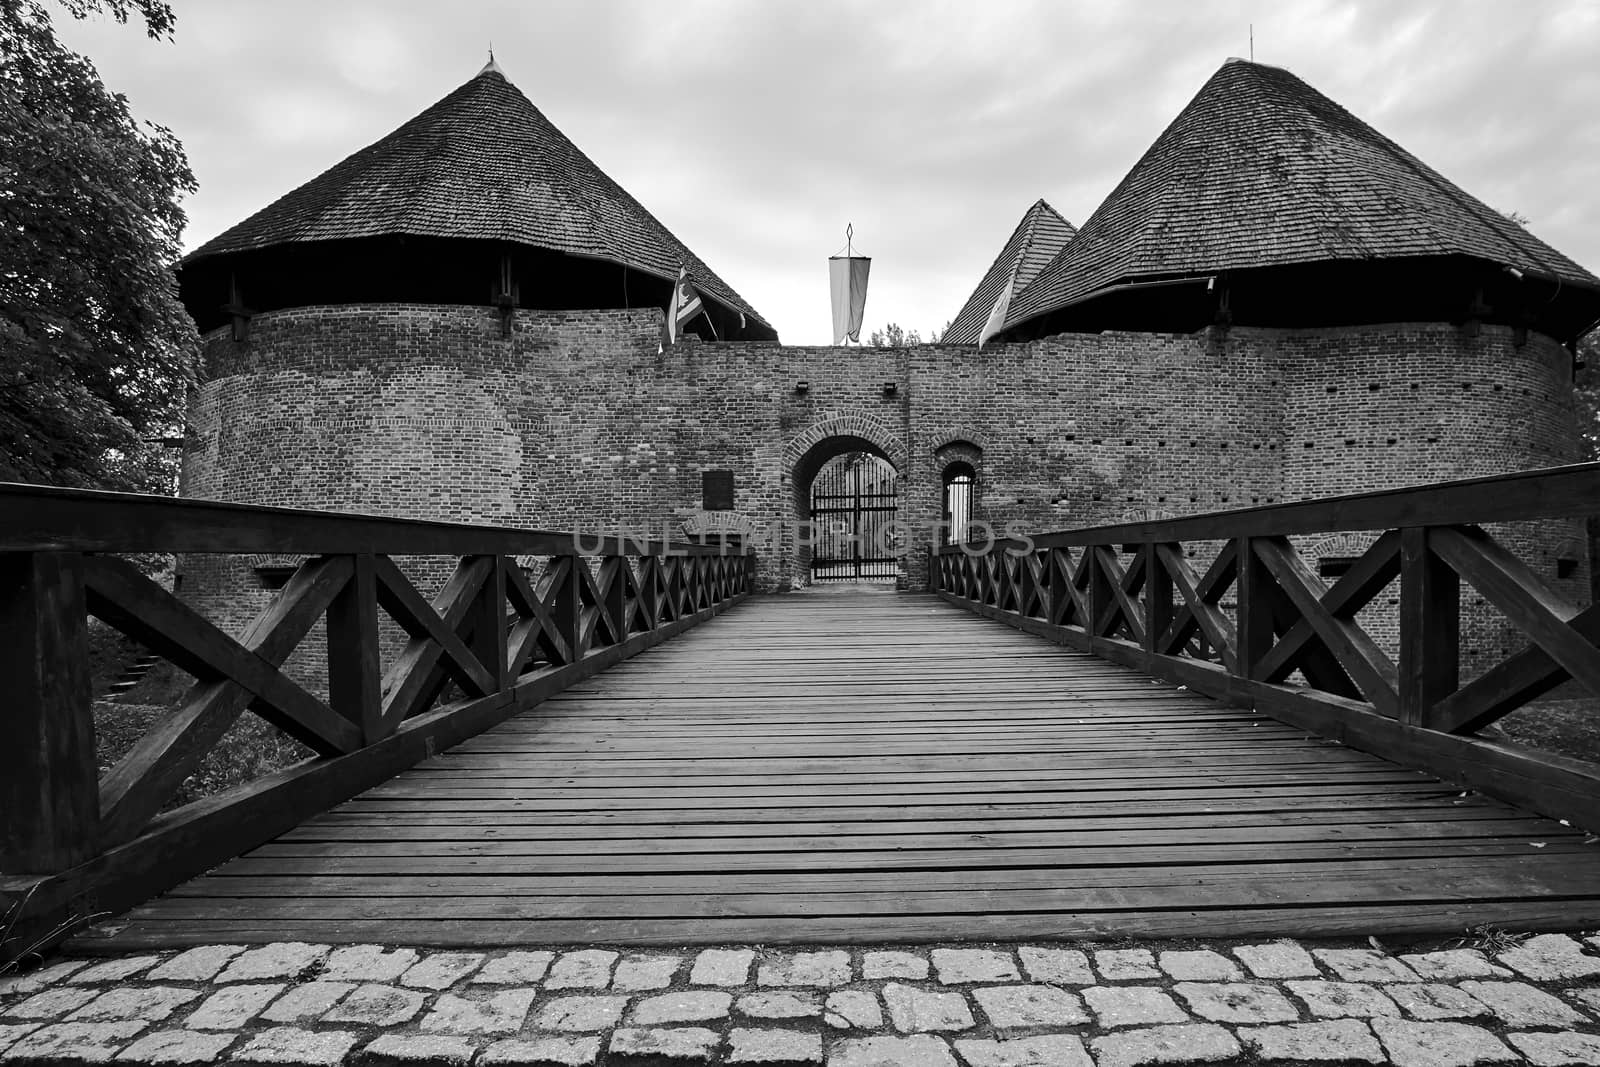 Bridge over the moat and a medieval fortified castle in Miedzyrzecz in Poland, monochrome